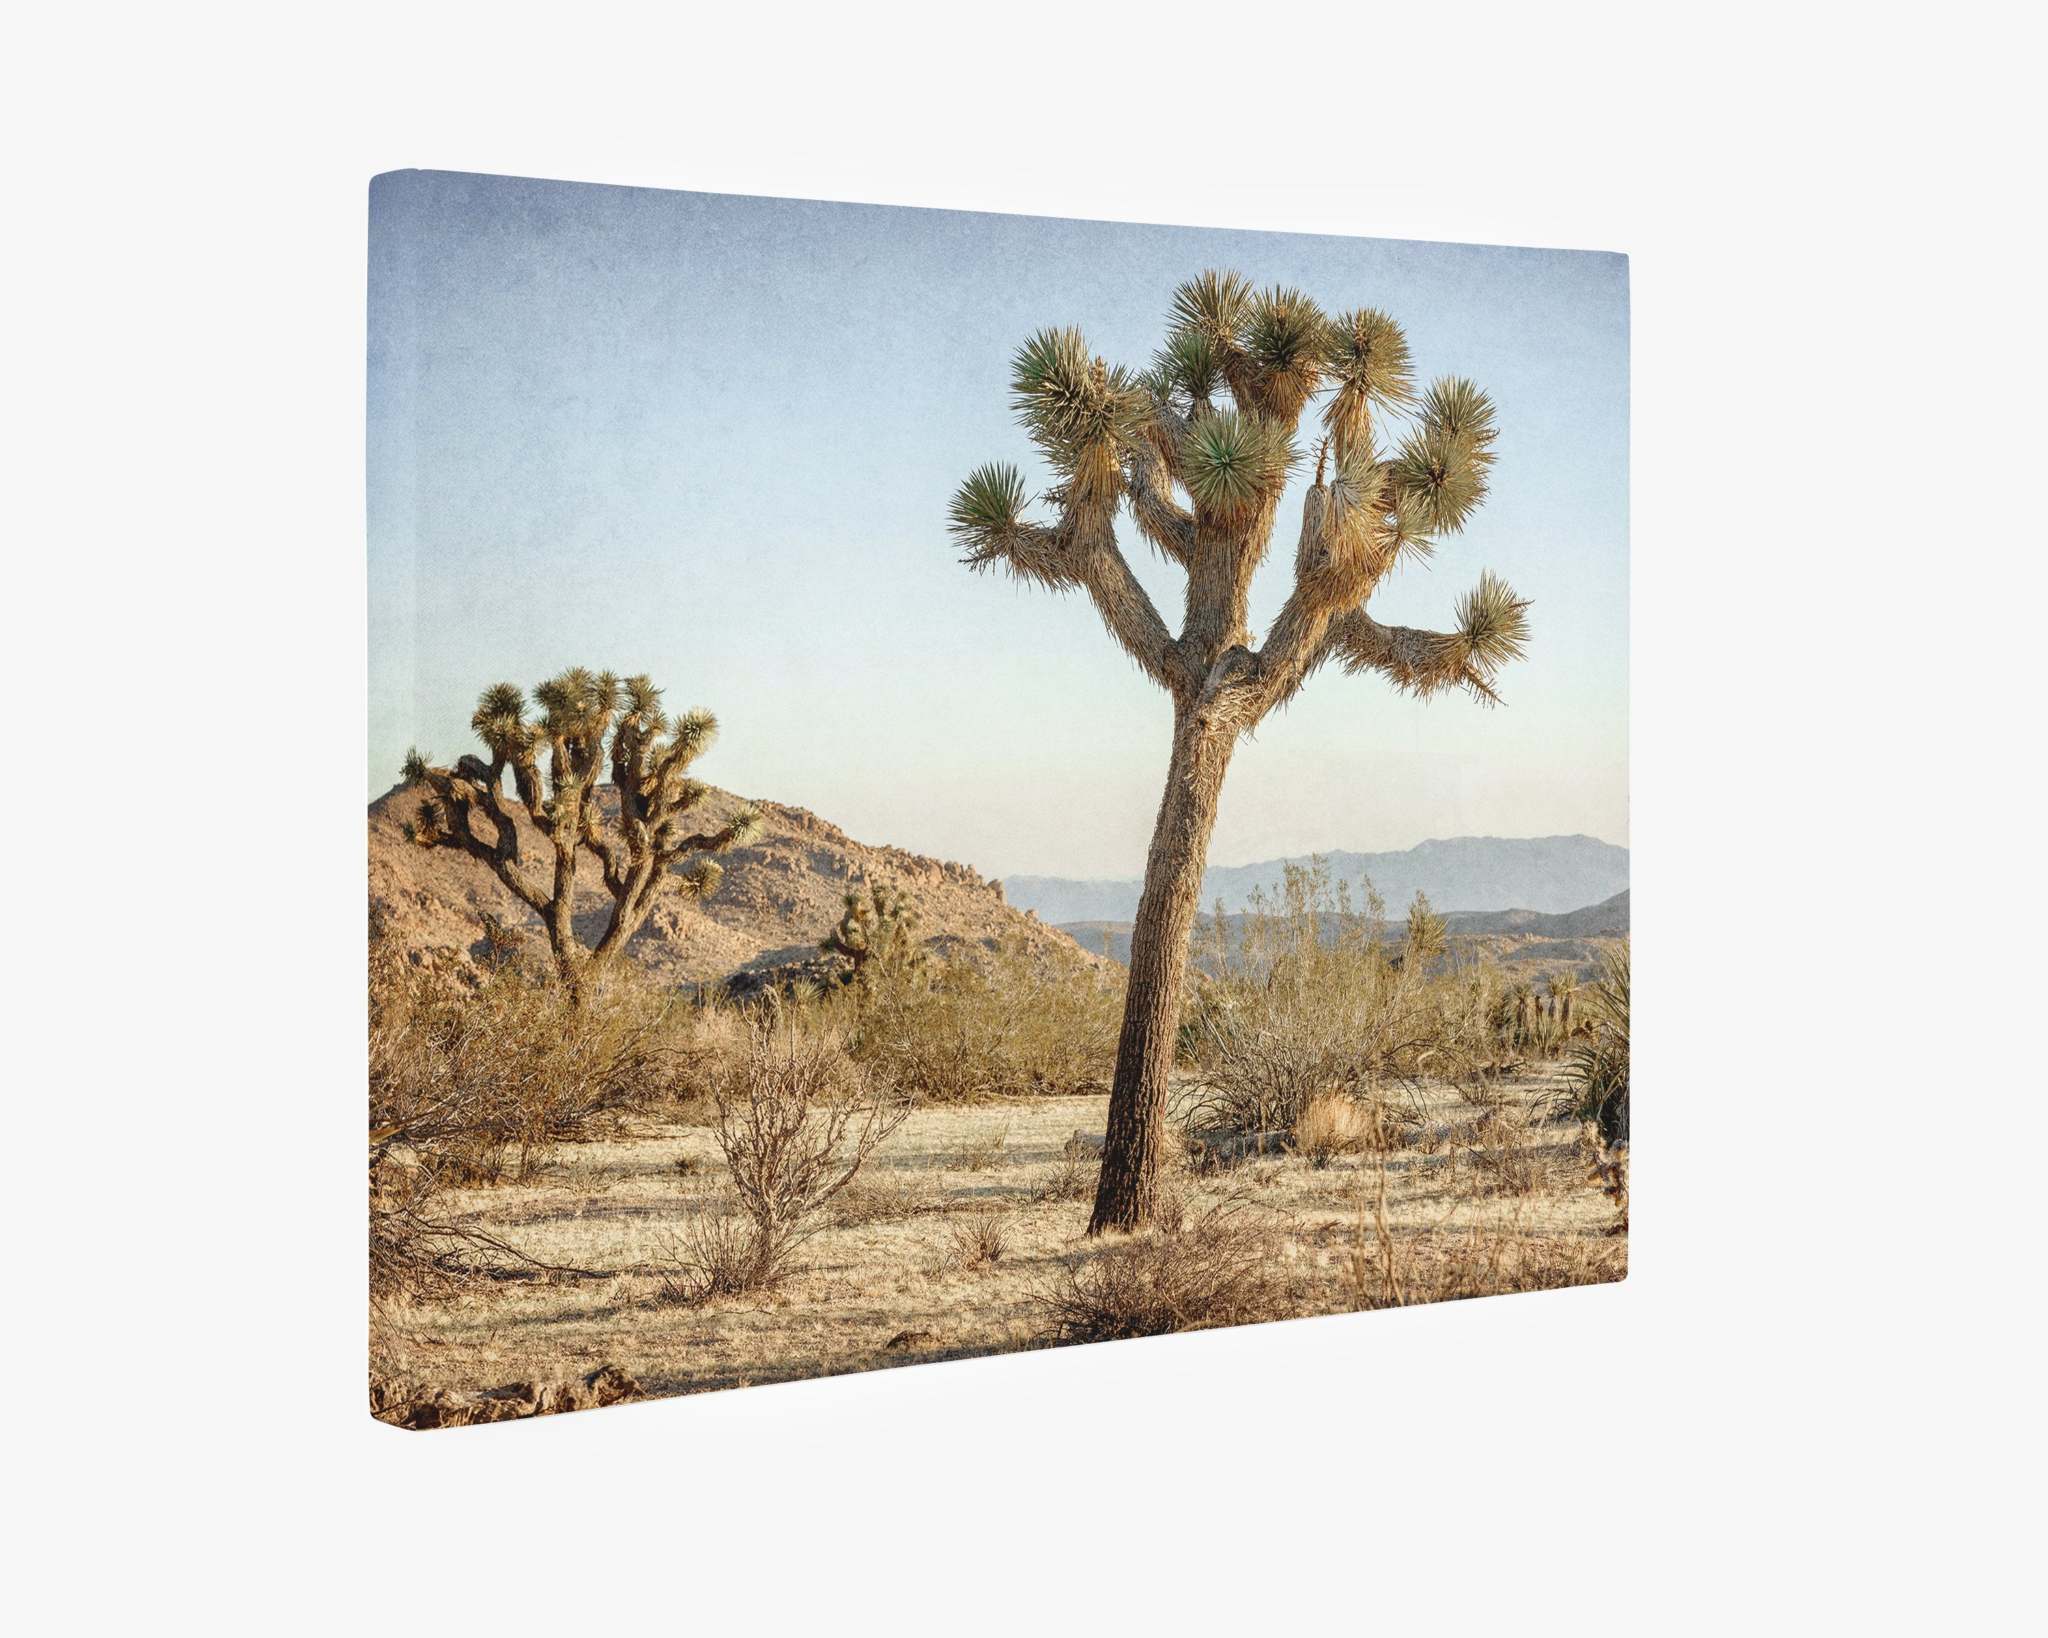 An Offley Green Joshua Tree Canvas Wall Art, &#39;Mighty Joshua,&#39; featuring a desert landscape with Joshua trees. The scene depicts a clear sky with distant mountains, dry brush, and scattered vegetation in an arid environment, reminiscent of the iconic views found in Joshua Tree National Park.